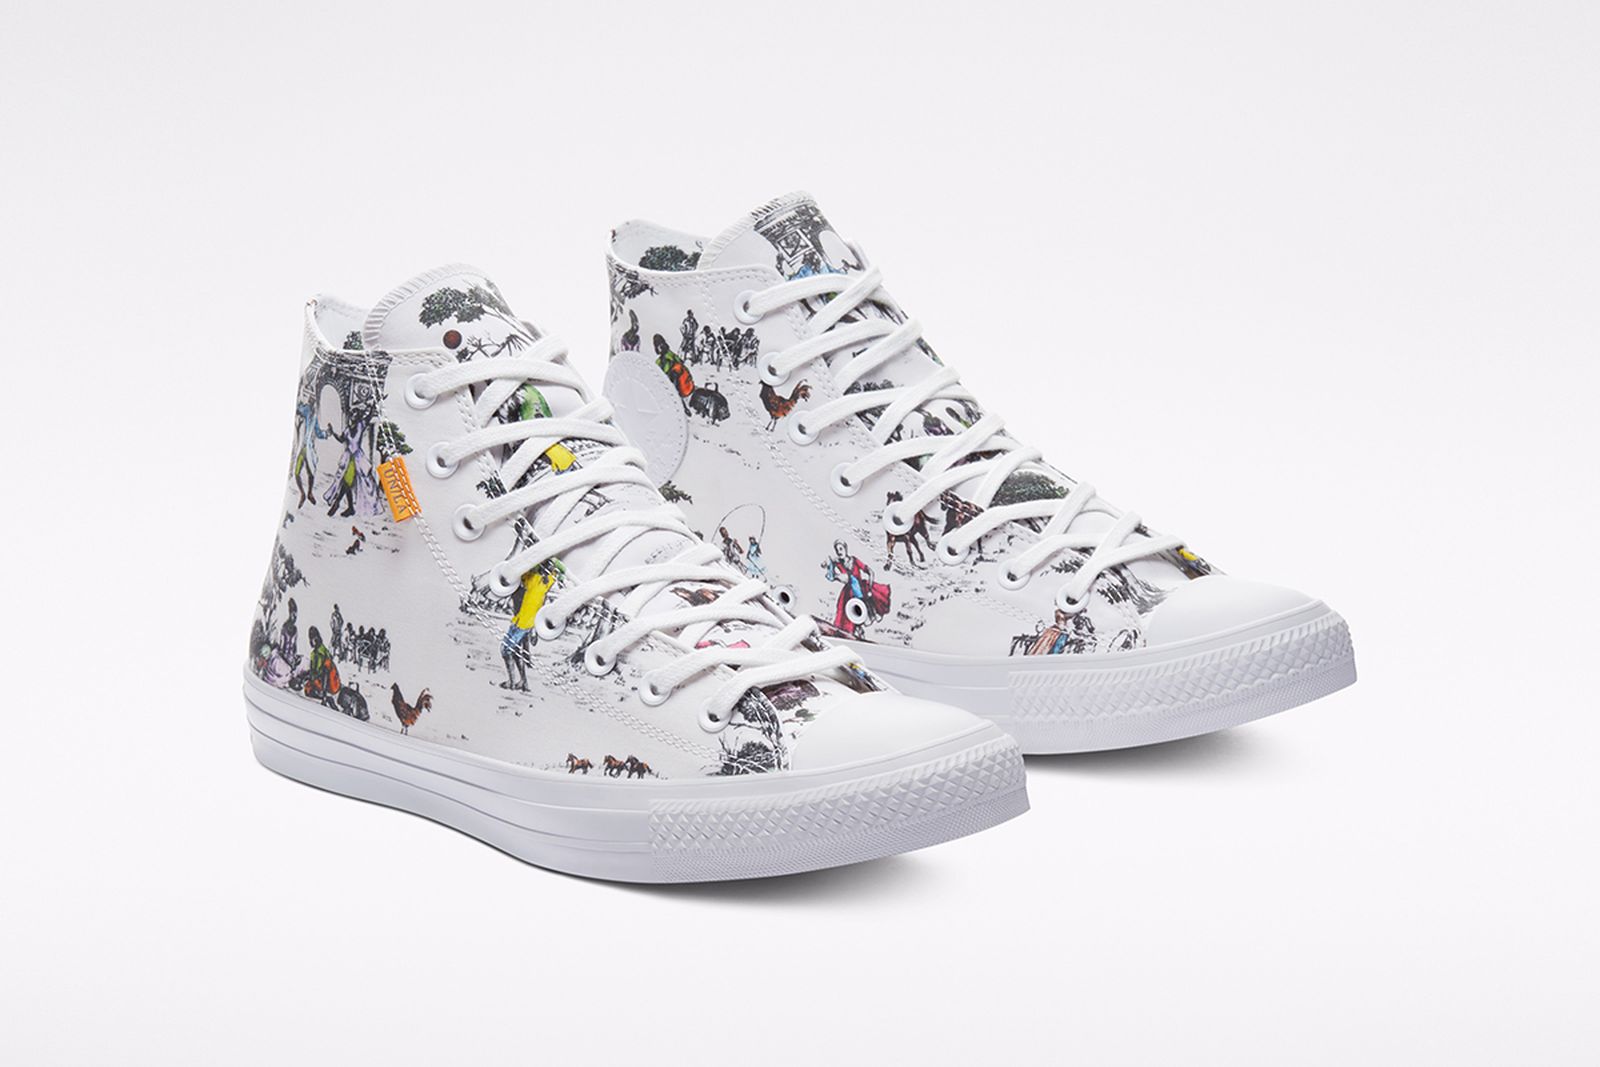 union-converse-chuck-taylor-all-star-release-date-price-1-03